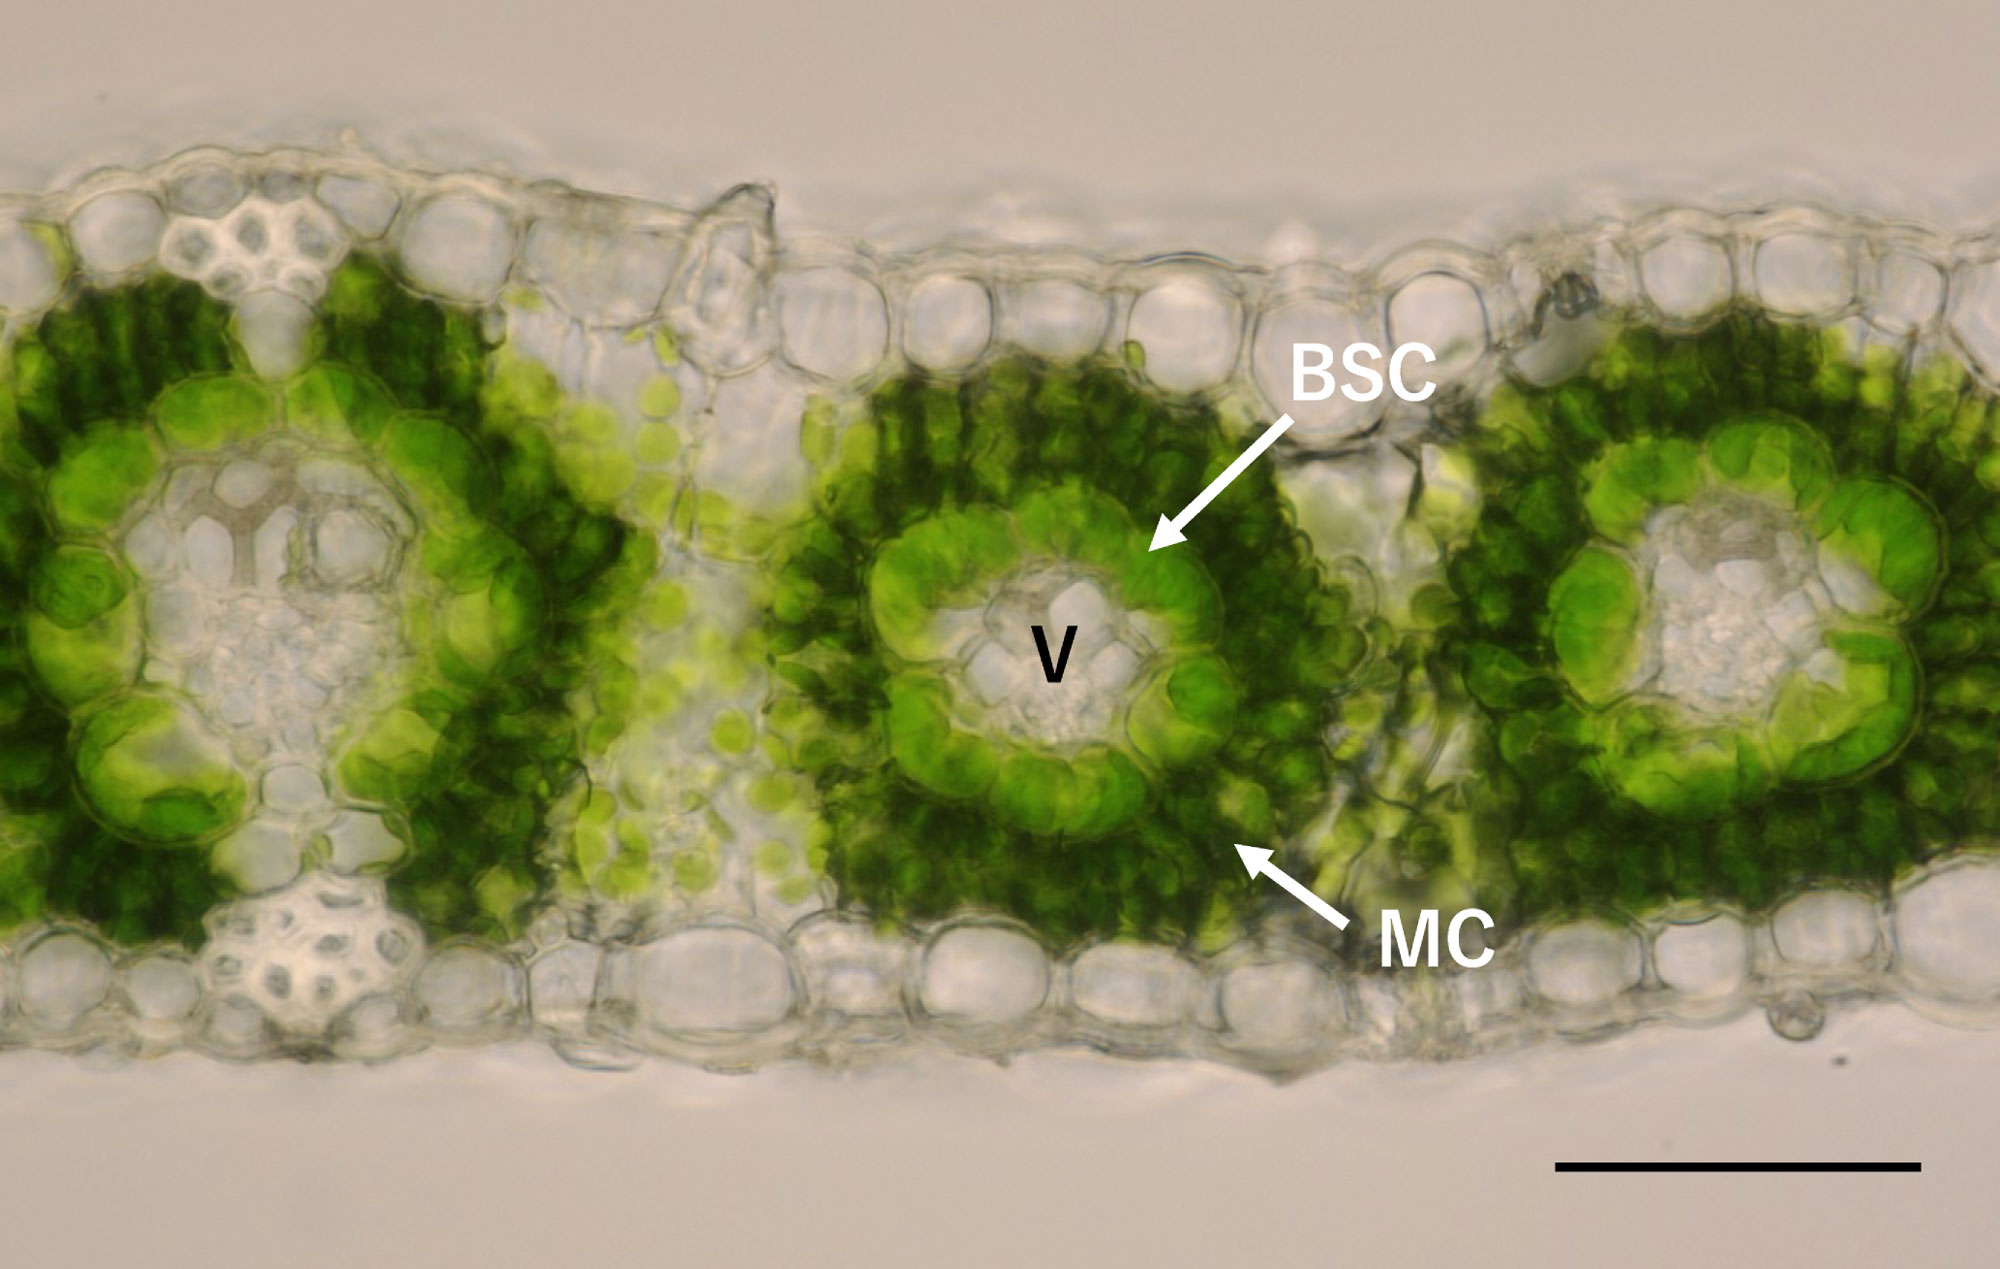 Photograph of a fresh cross section of a sorghum leaf. The photo shows three vascular bundles with vascular tissue at the center. Each vascular bundle is surrounded by a single layer of bundle sheath cells with bright green chloroplasts. Dark green mesophyll cells surround the bundle sheaths. One vascular bundle is labeled.